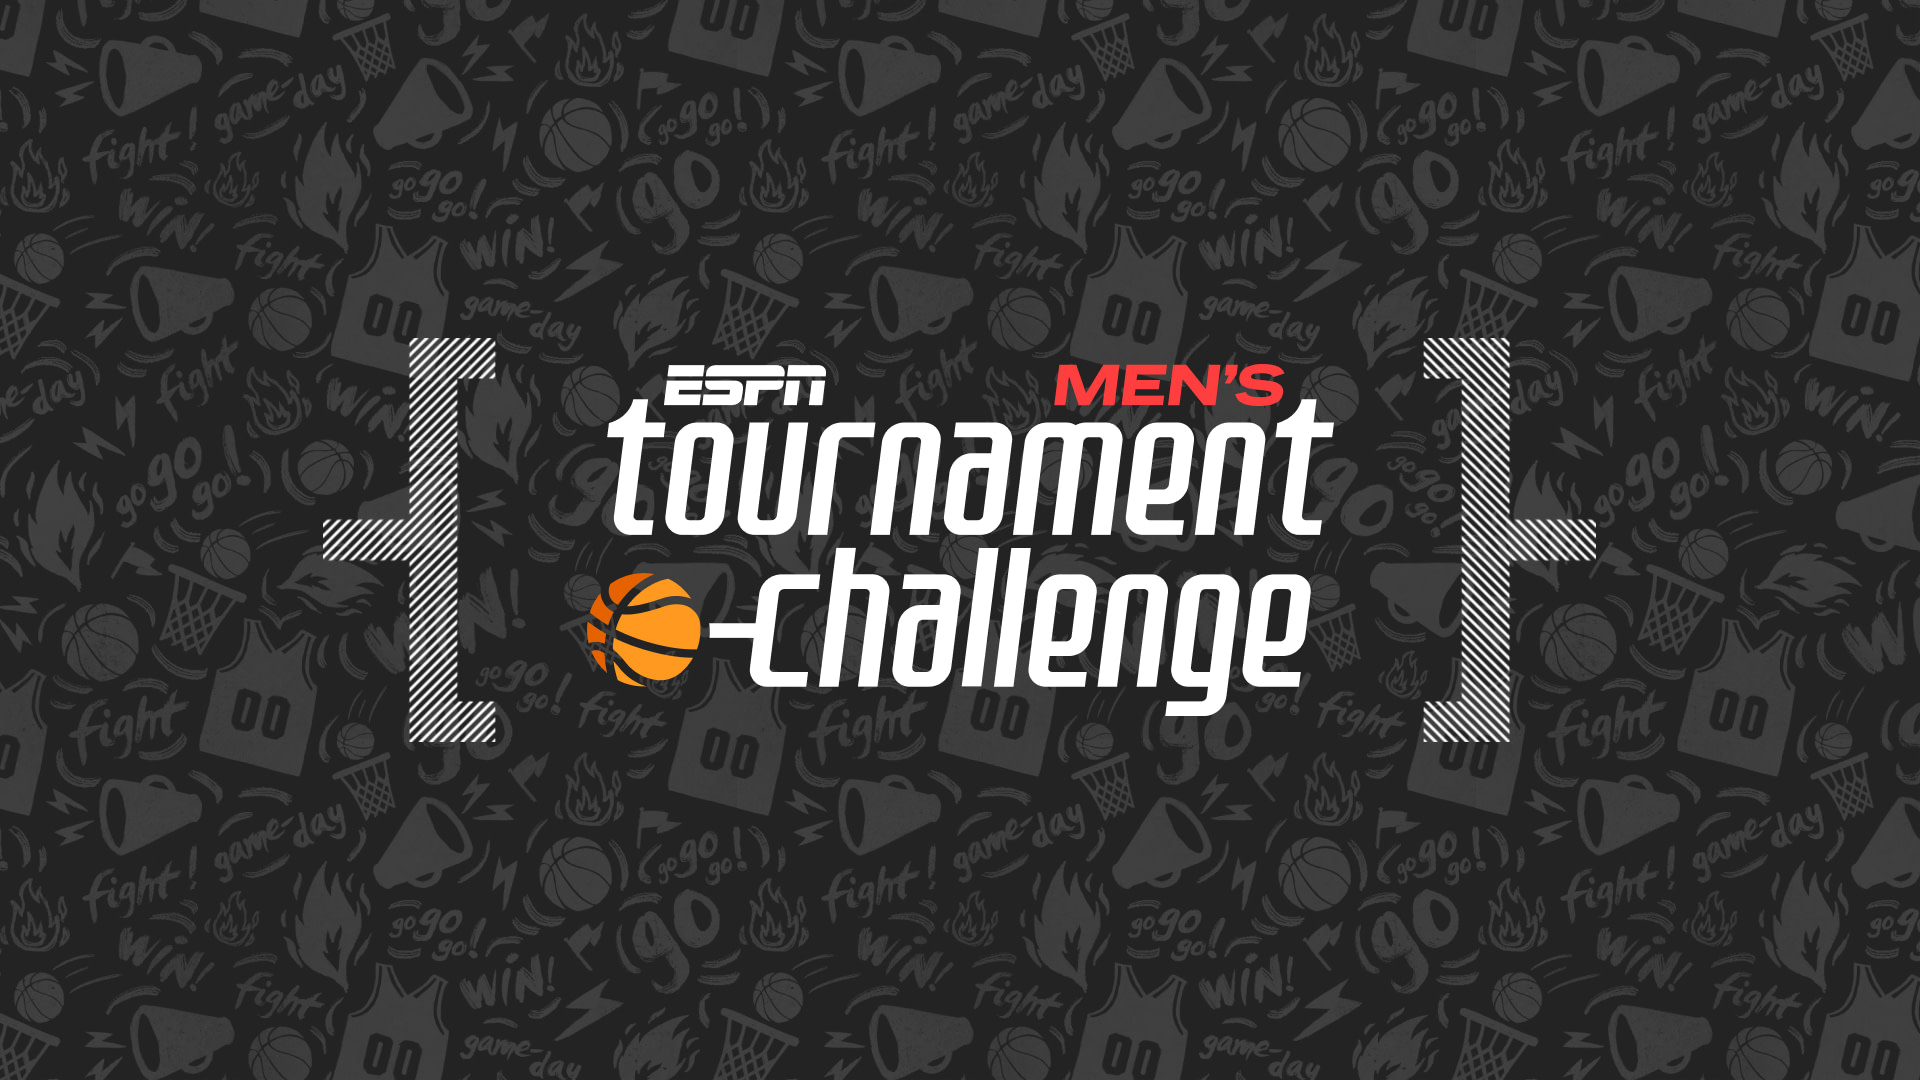 2023 NCAA March Madness bracket opening betting lines and odds